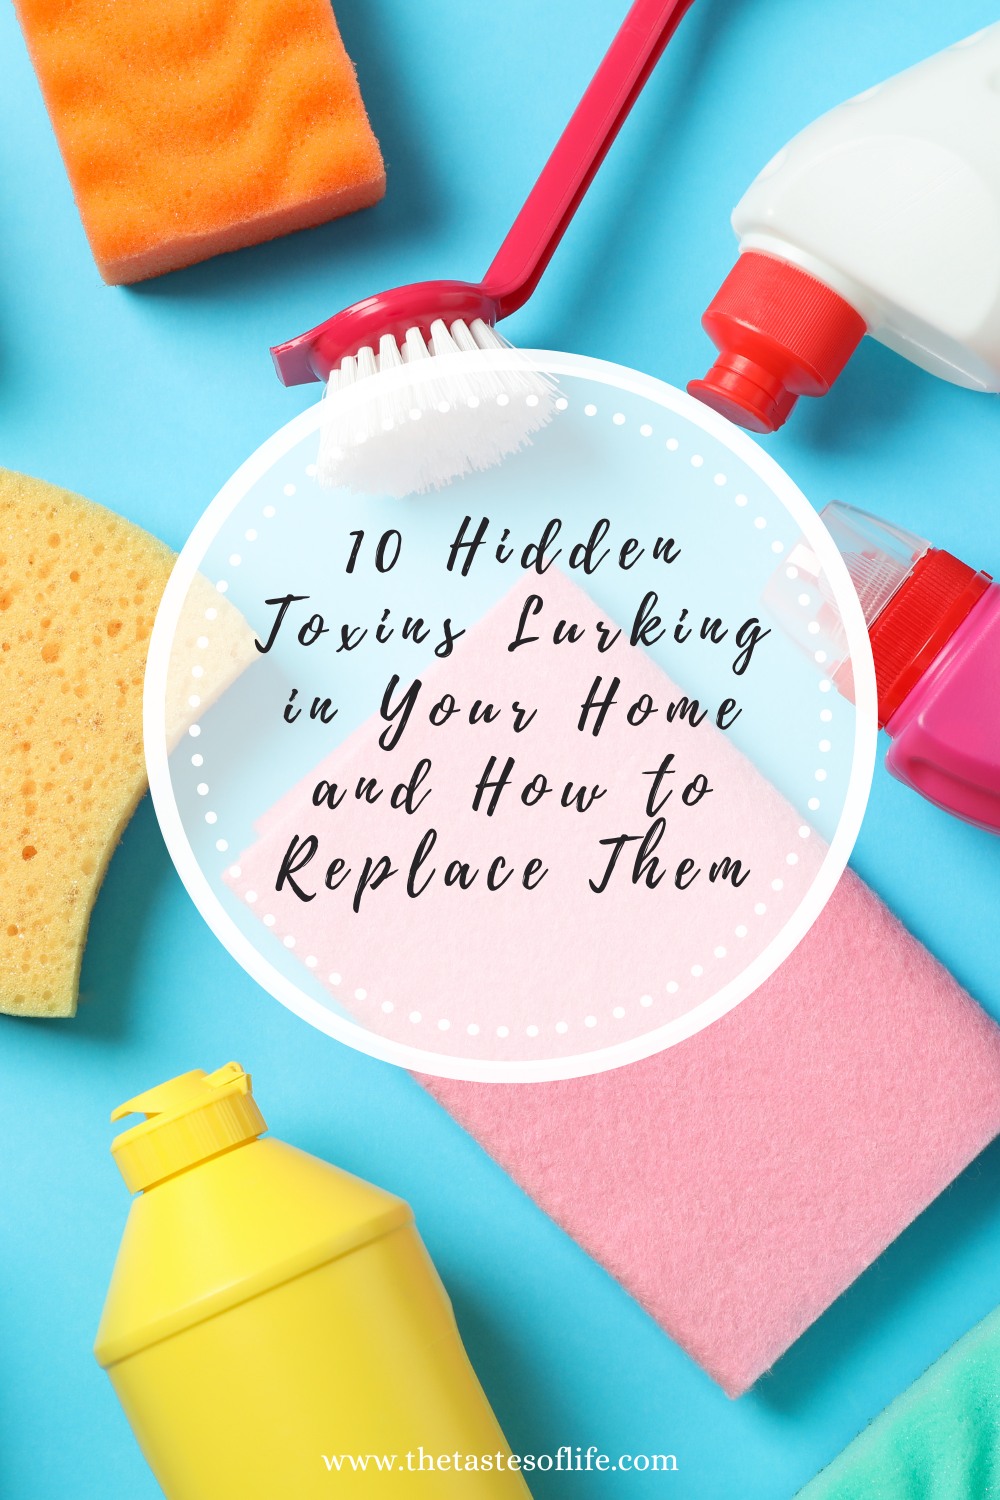 10 Hidden Toxins Lurking in Your Home and How to Replace Them